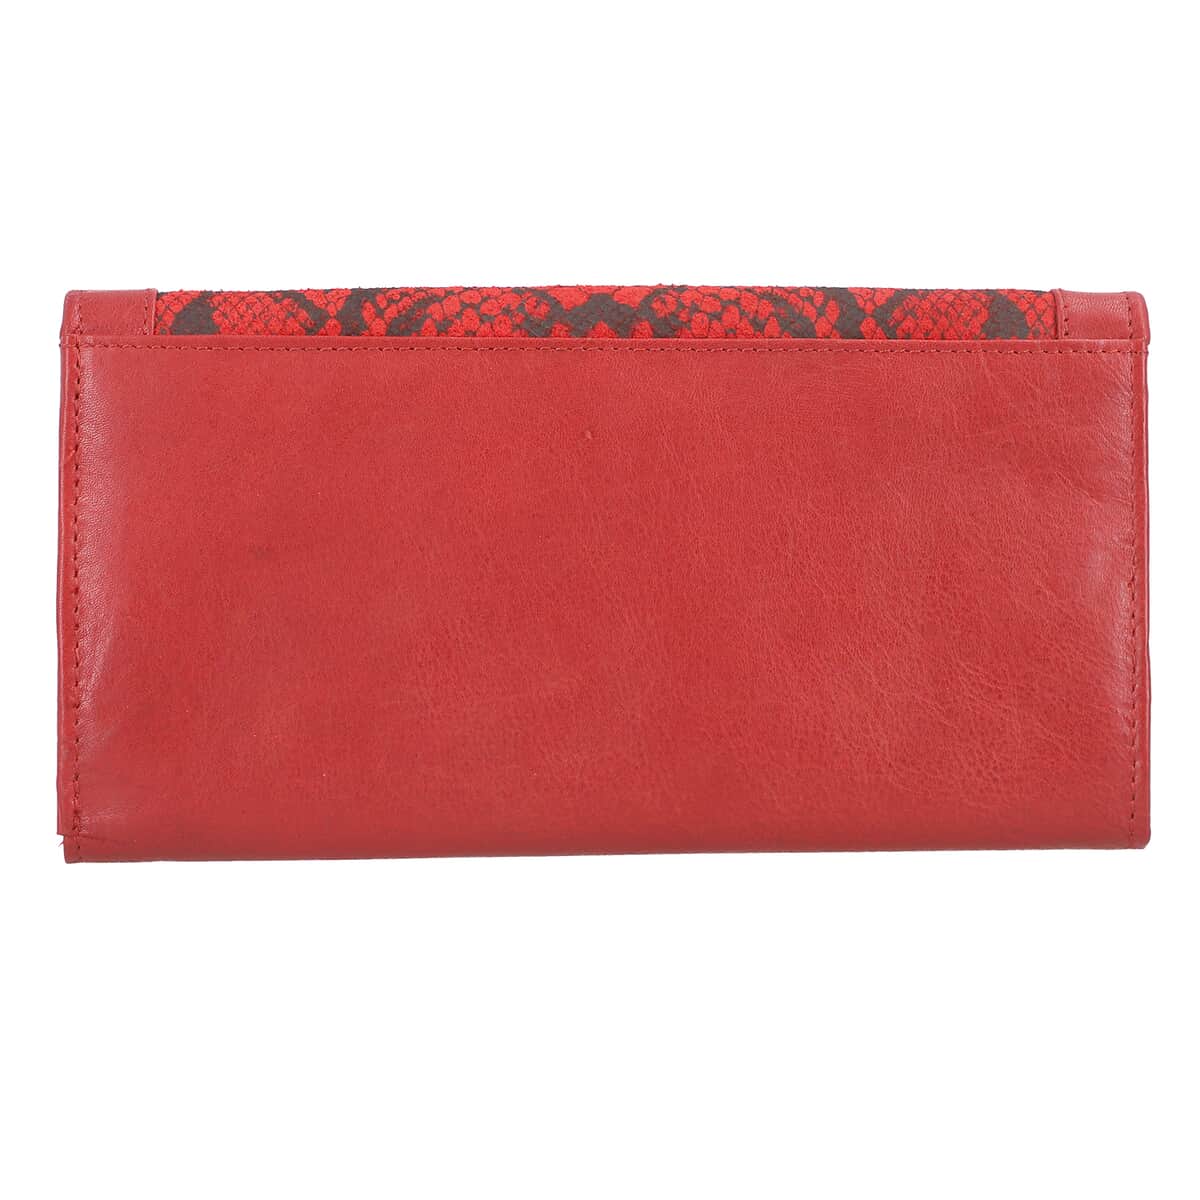 Union Code Red Genuine Leather RFID Women's Wallet image number 6